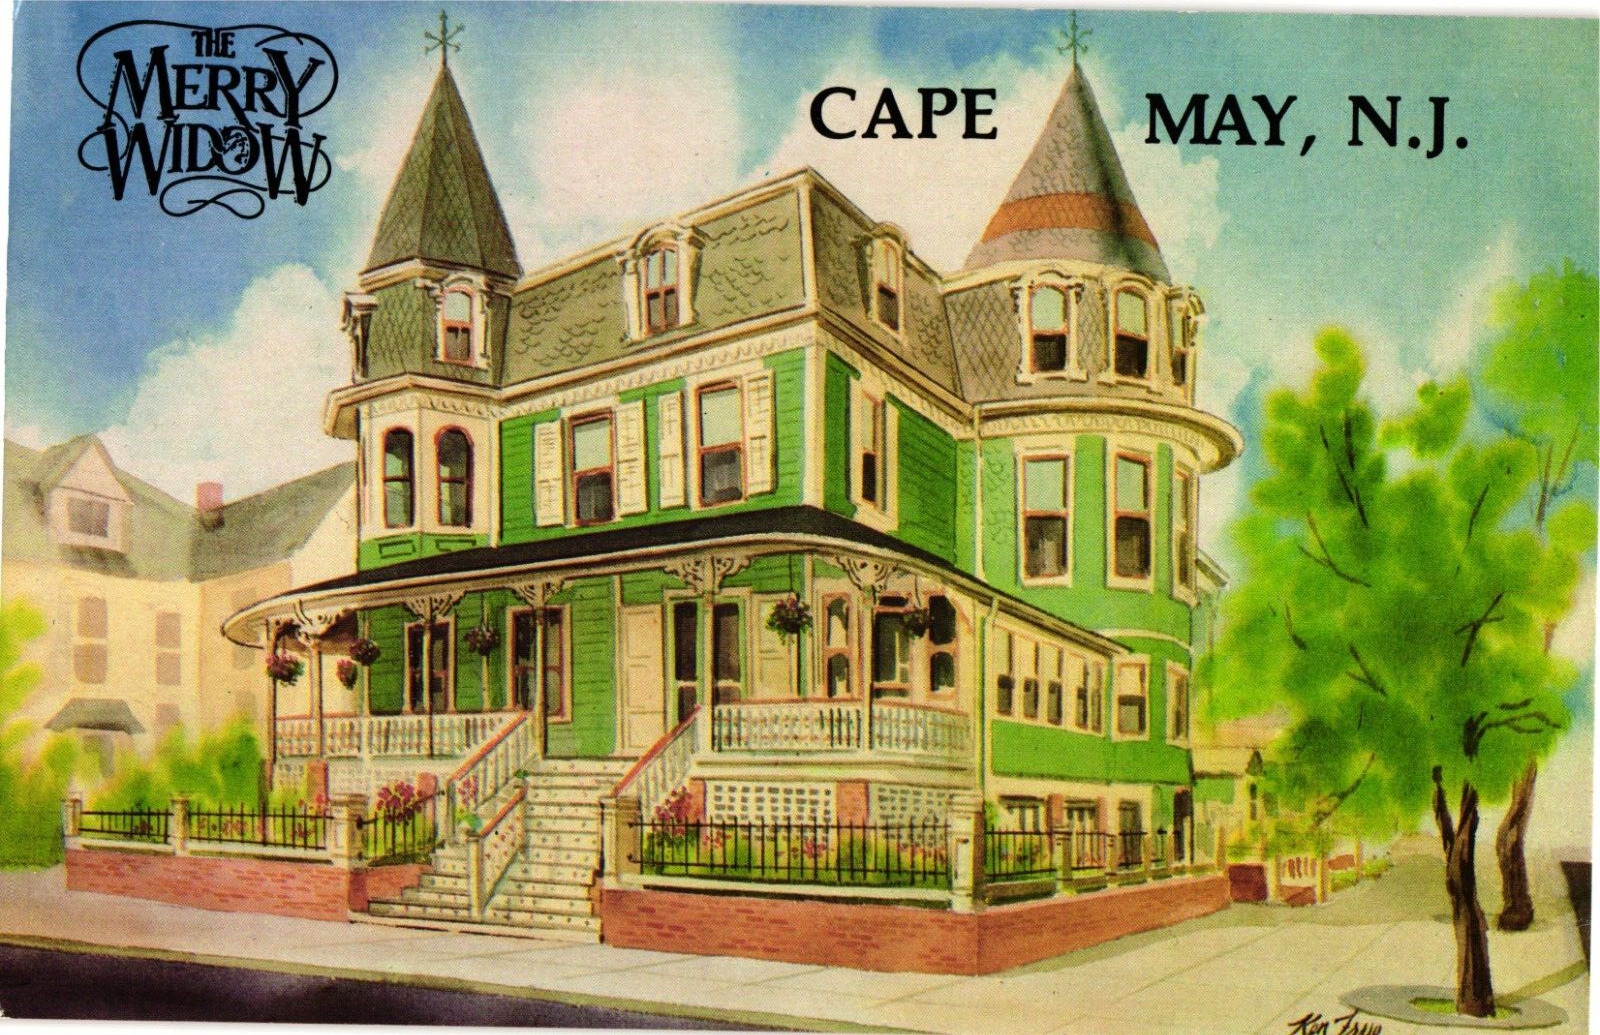 The Merry Widow Inn Cape May New Jersey Divided Unposted Postcard 1970s